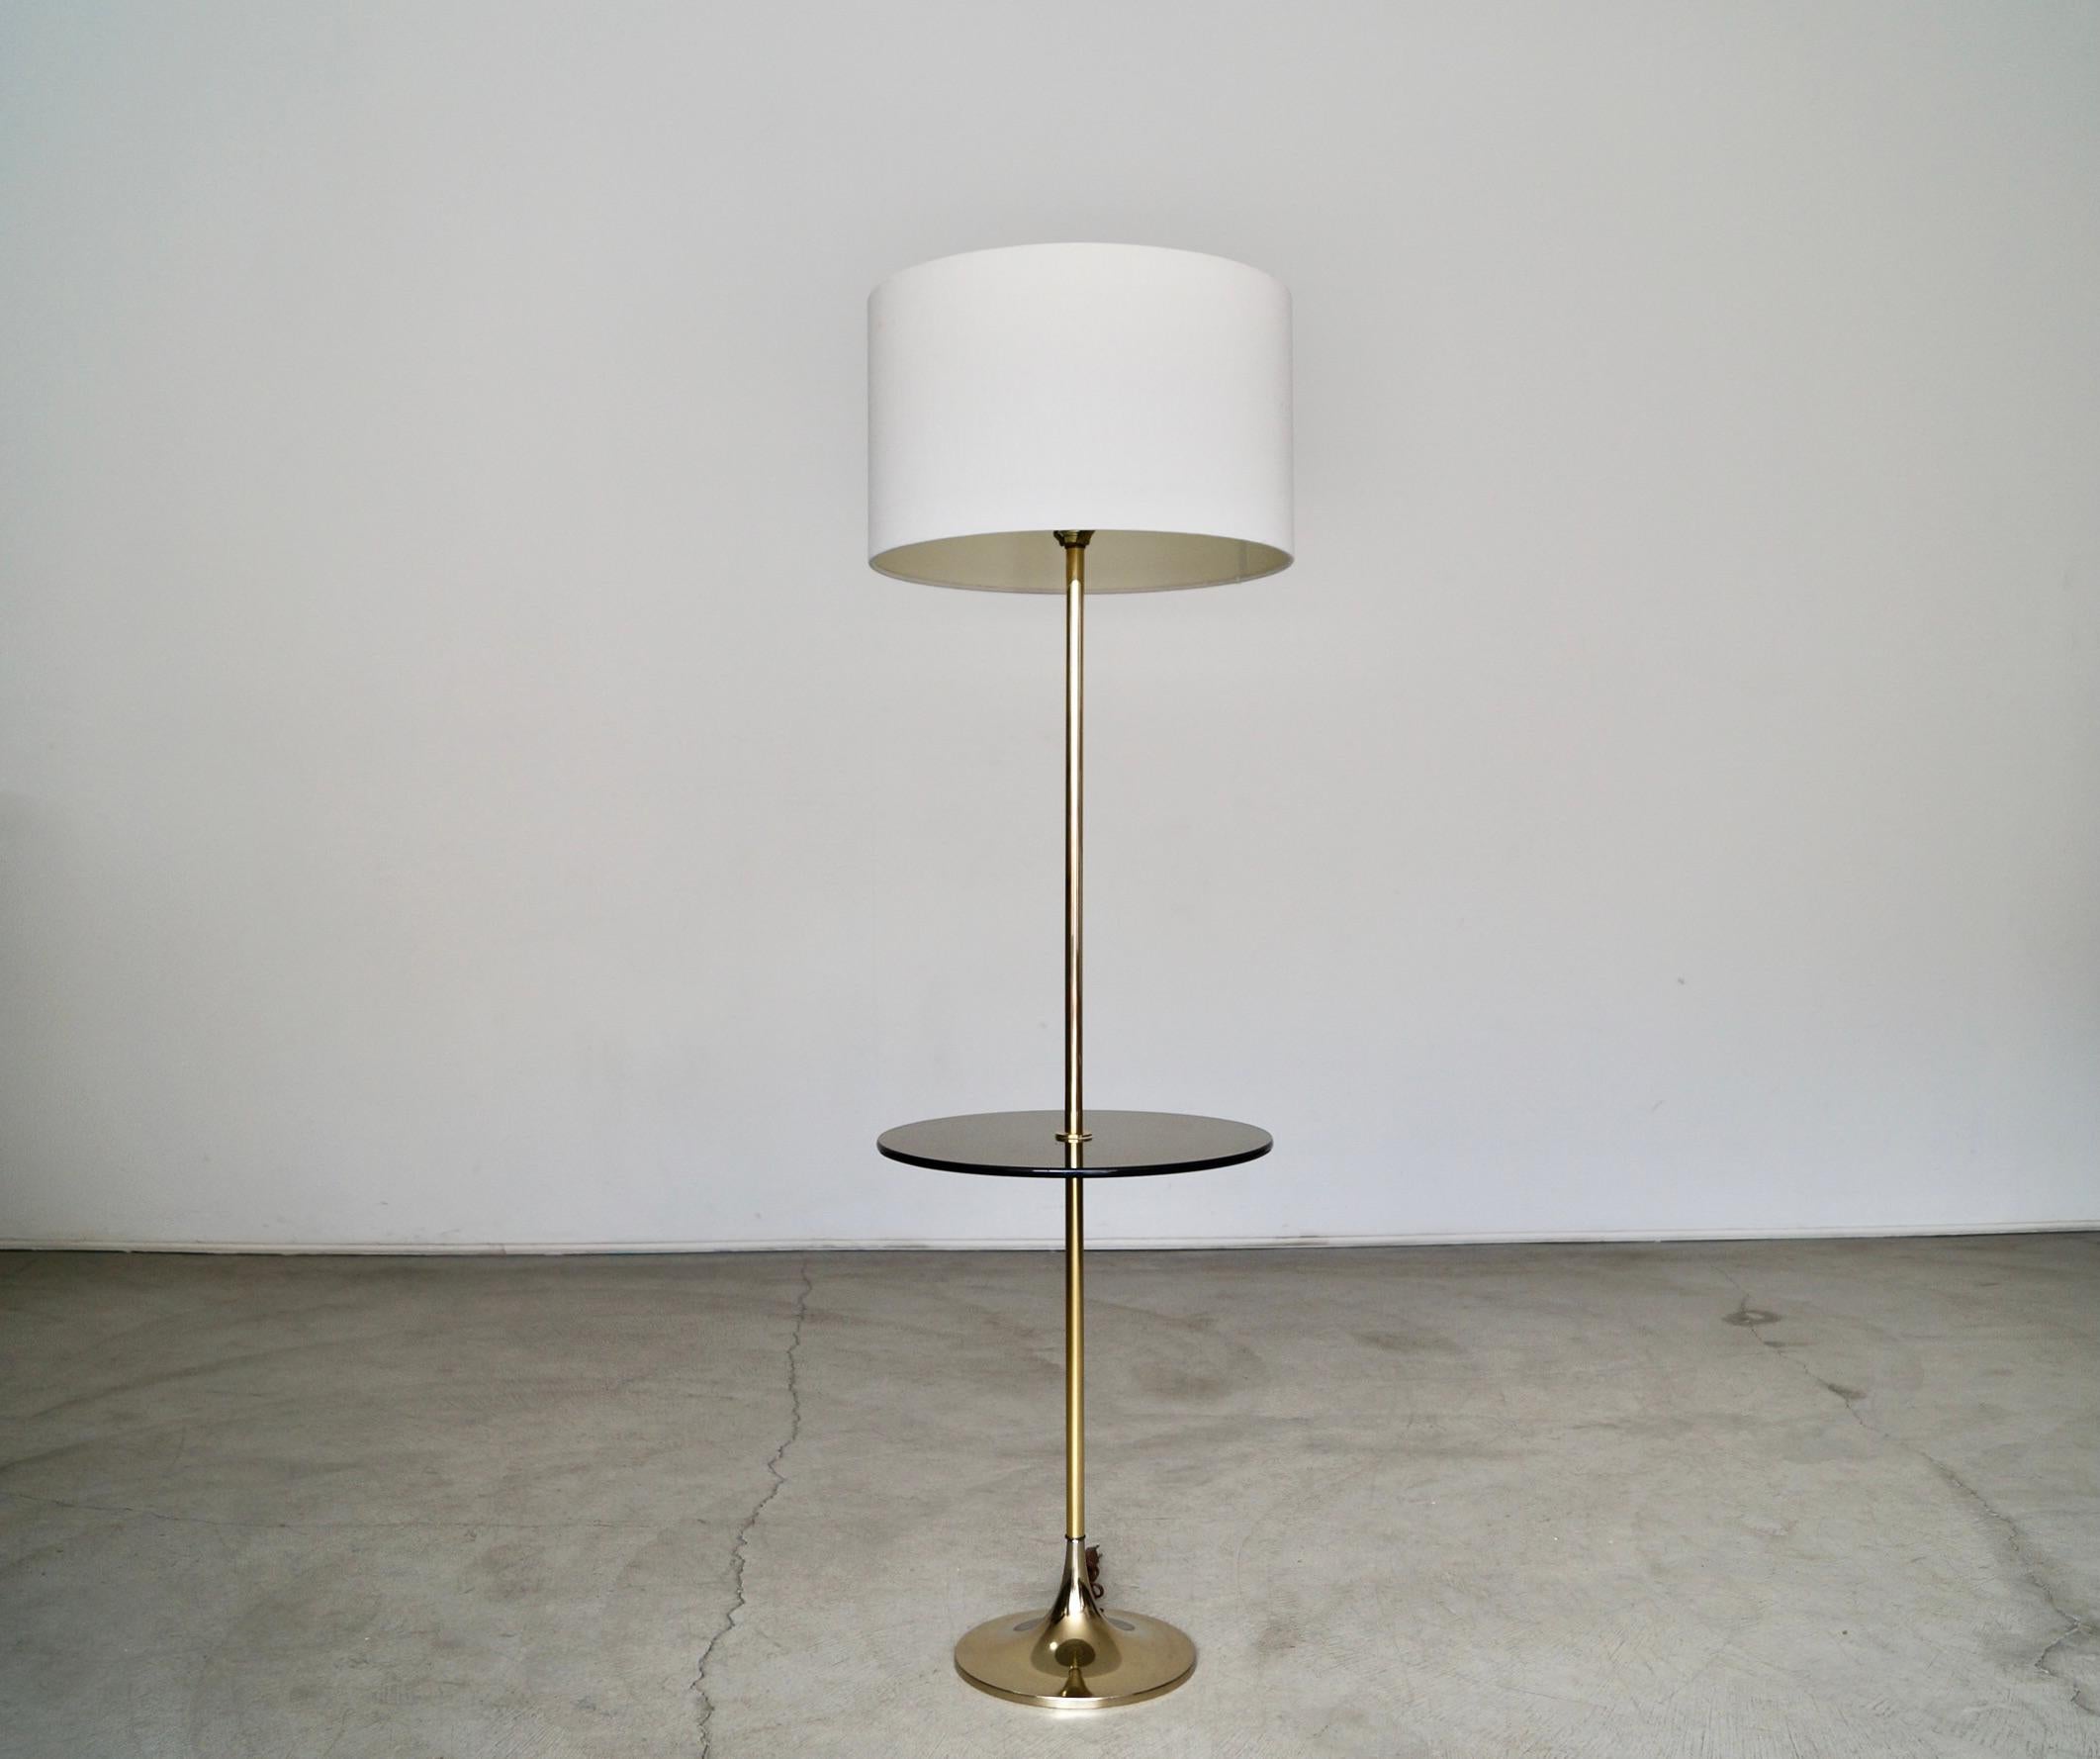 Vintage 1960’s Mid-century Modern floor lamp for sale. Manufactured by Laurel Lighting in the 1960’s, and in excellent condition. It’s the classic tulip lamp with a brass base and stem, and has a smoked glass end table. The glass is in amazing